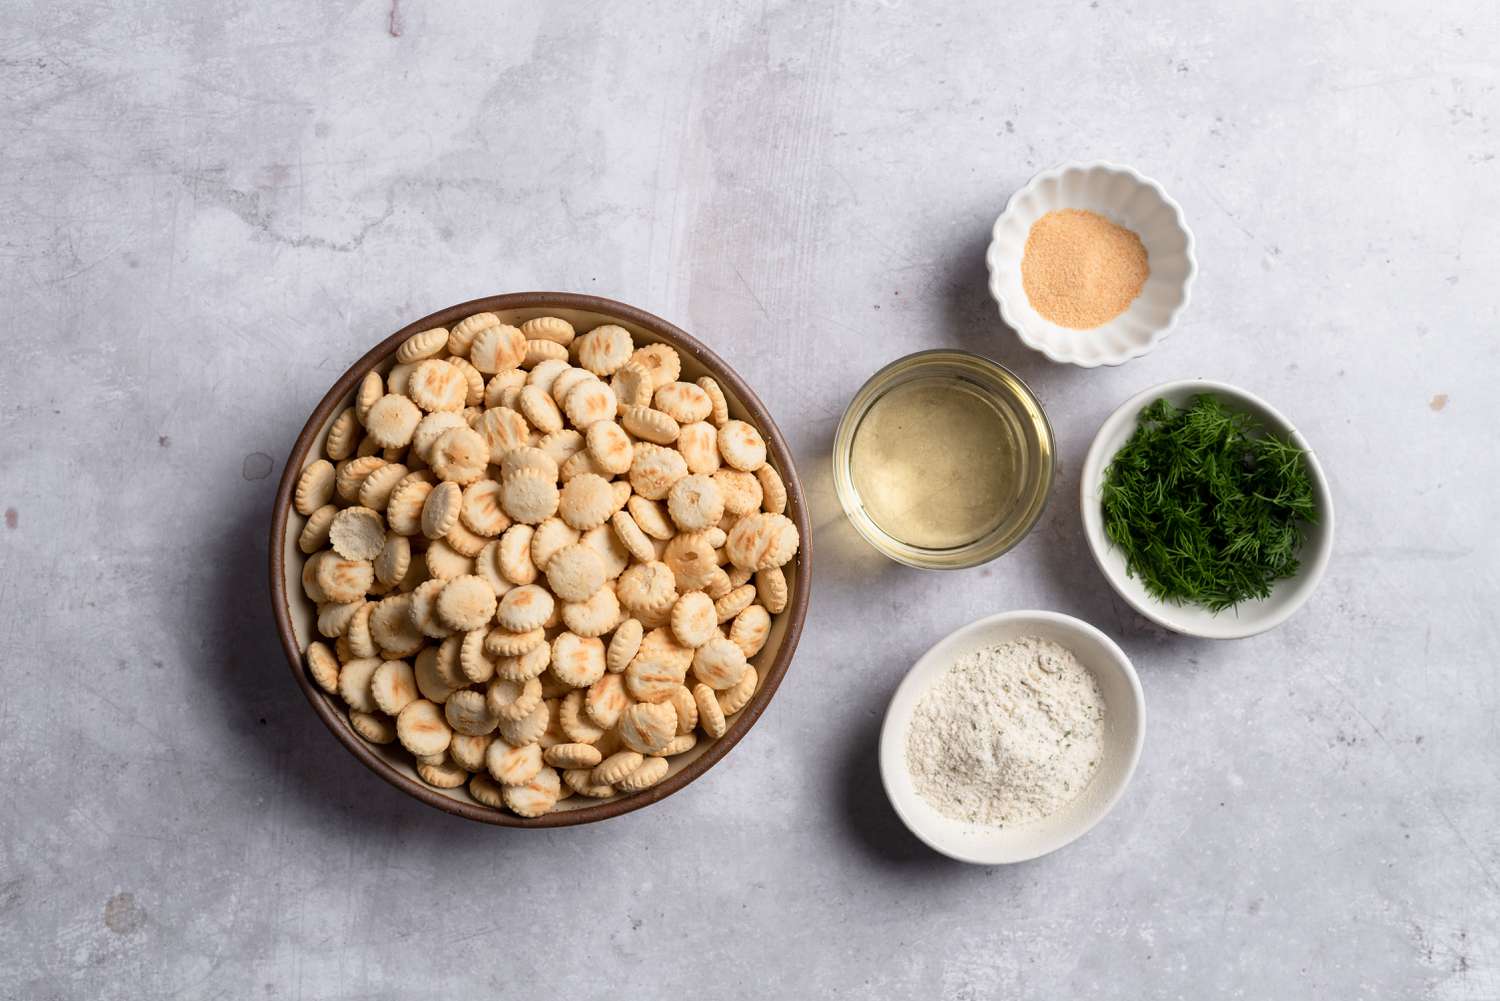 Ingredients to make ranch oyster crackers